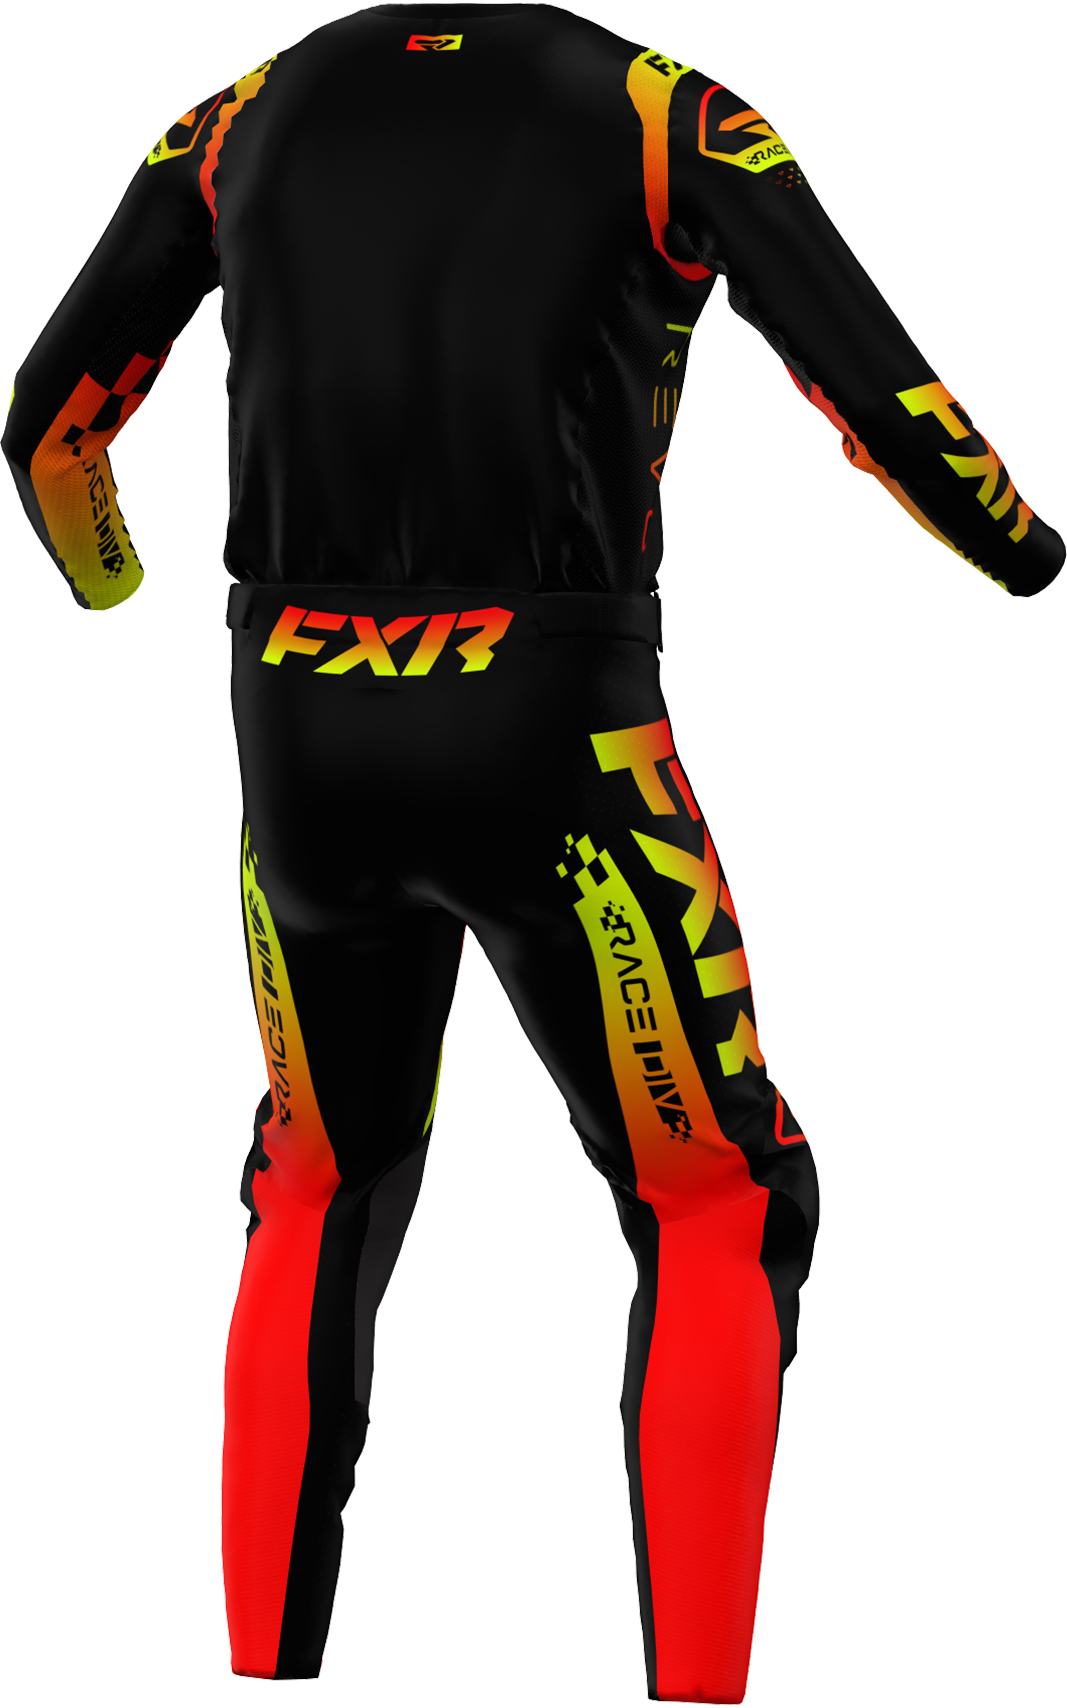 A 3D image of FXR's Revo Comp MX Jersey and Pant in Tequila Sunset/Black colorway